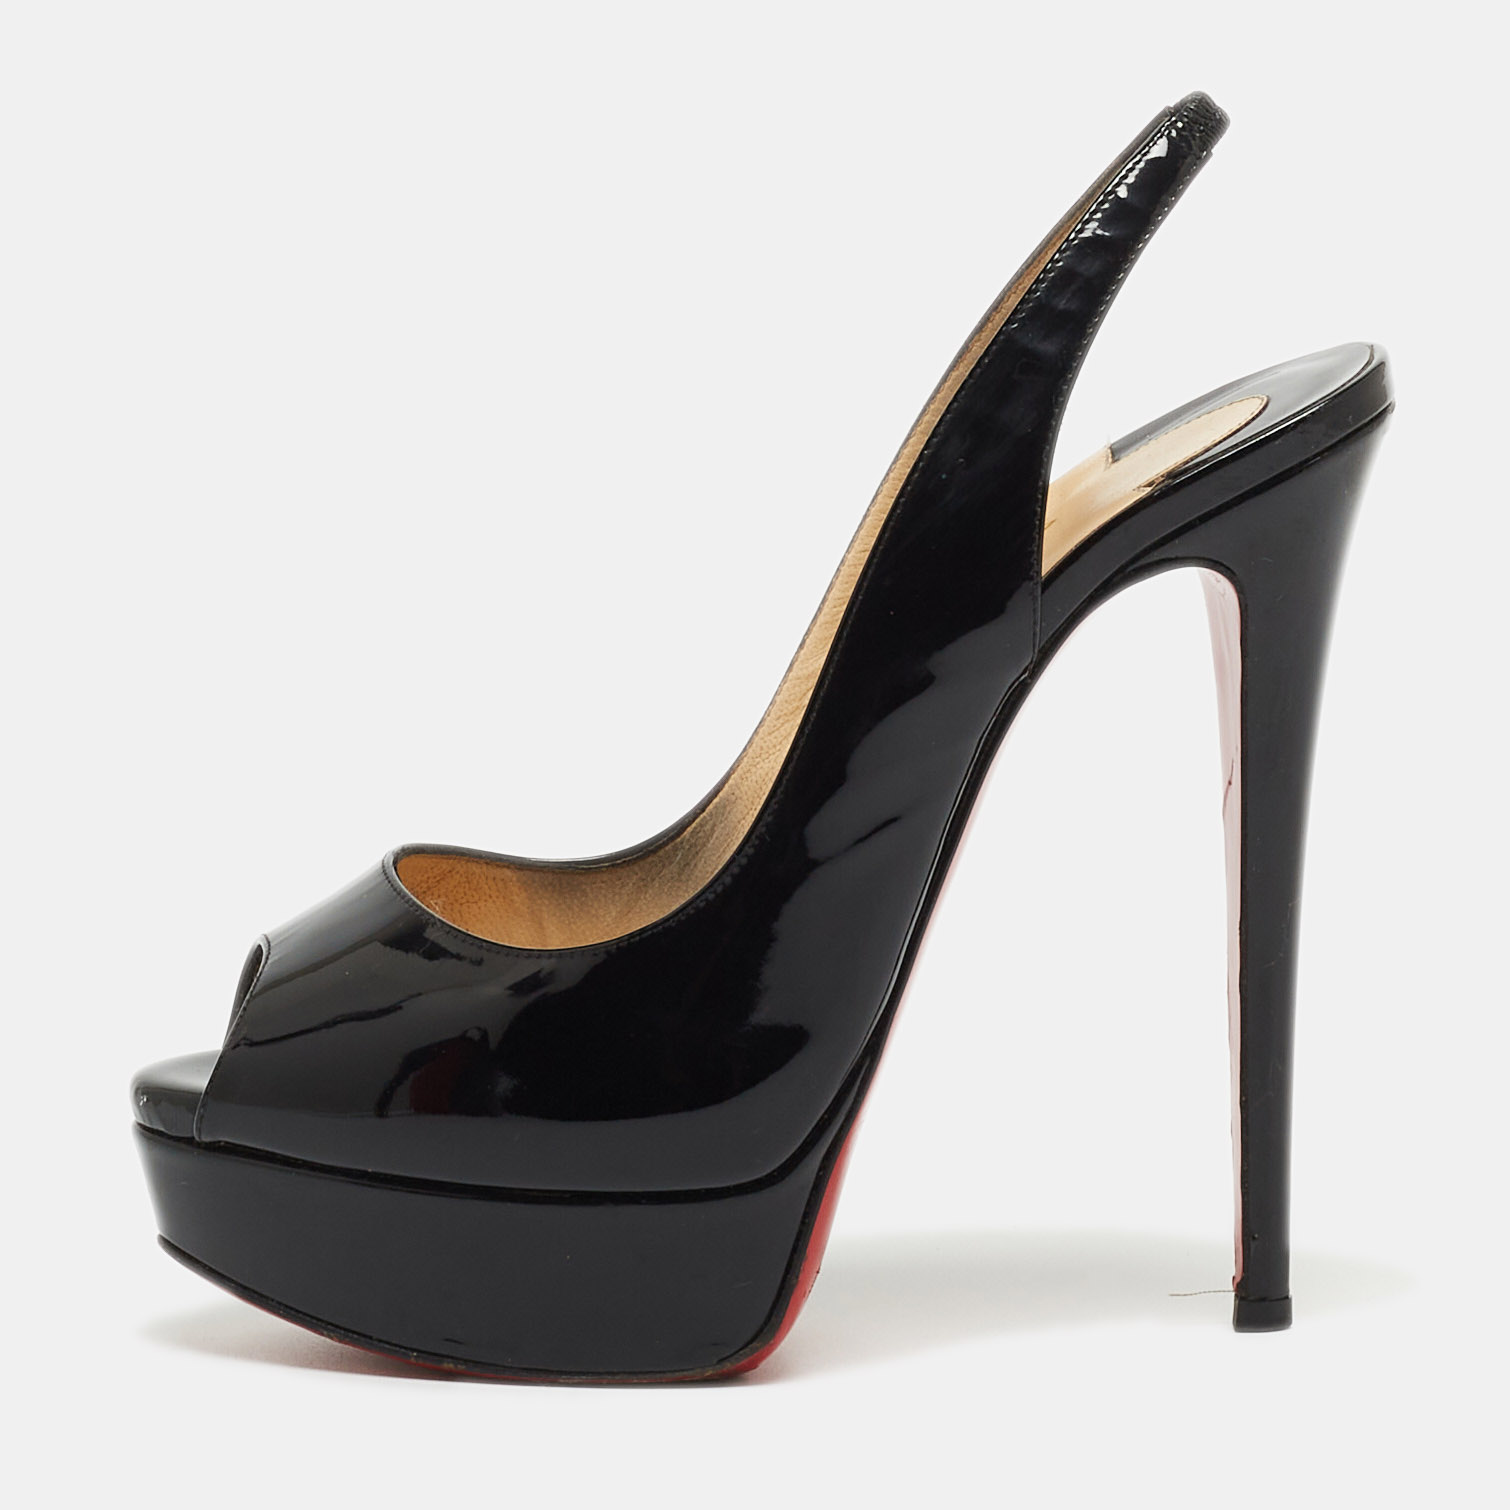 Pre-owned Christian Louboutin Black Patent Leather Private Number Peep Toe Platform Slingback Pumps Size 37